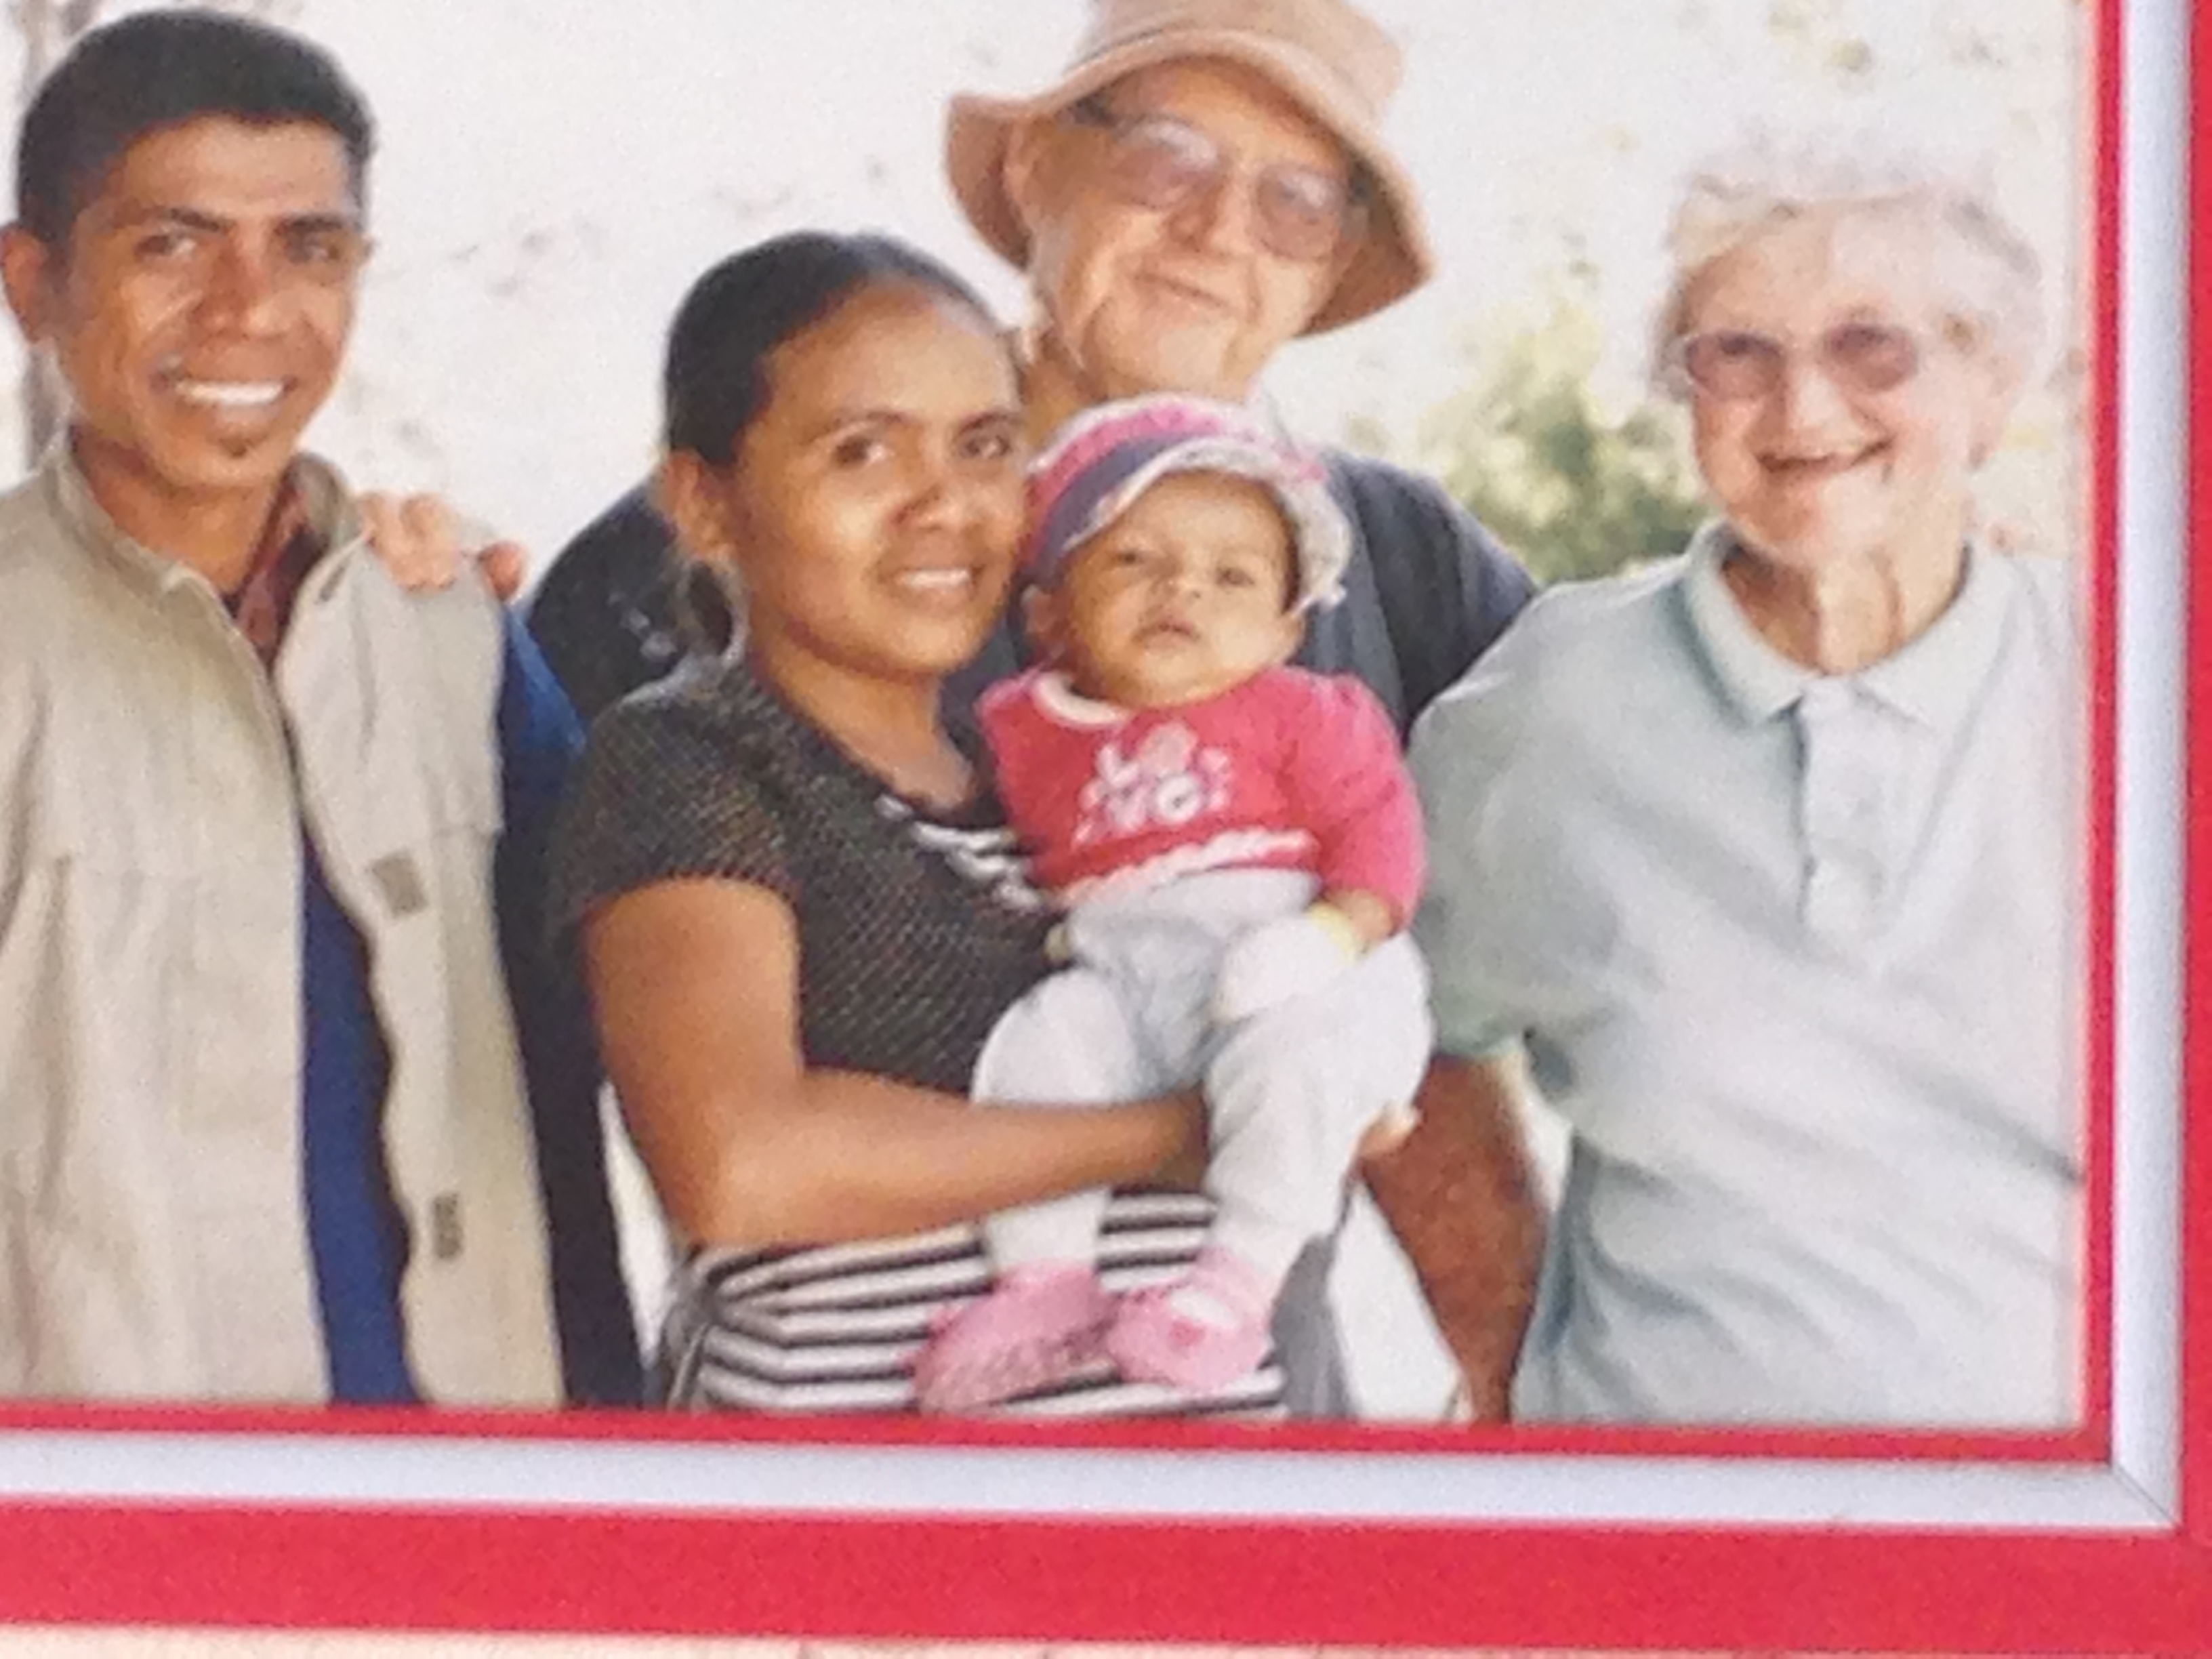 Jose Da Costa, his partner Lucy and their eldest daughter Moira, named after Moira Collins, pictured here with husband Jim. Both founding members of the Bega Valley Advocates for Timor Leste. This photo hangs on Jose and Lucy's wall.